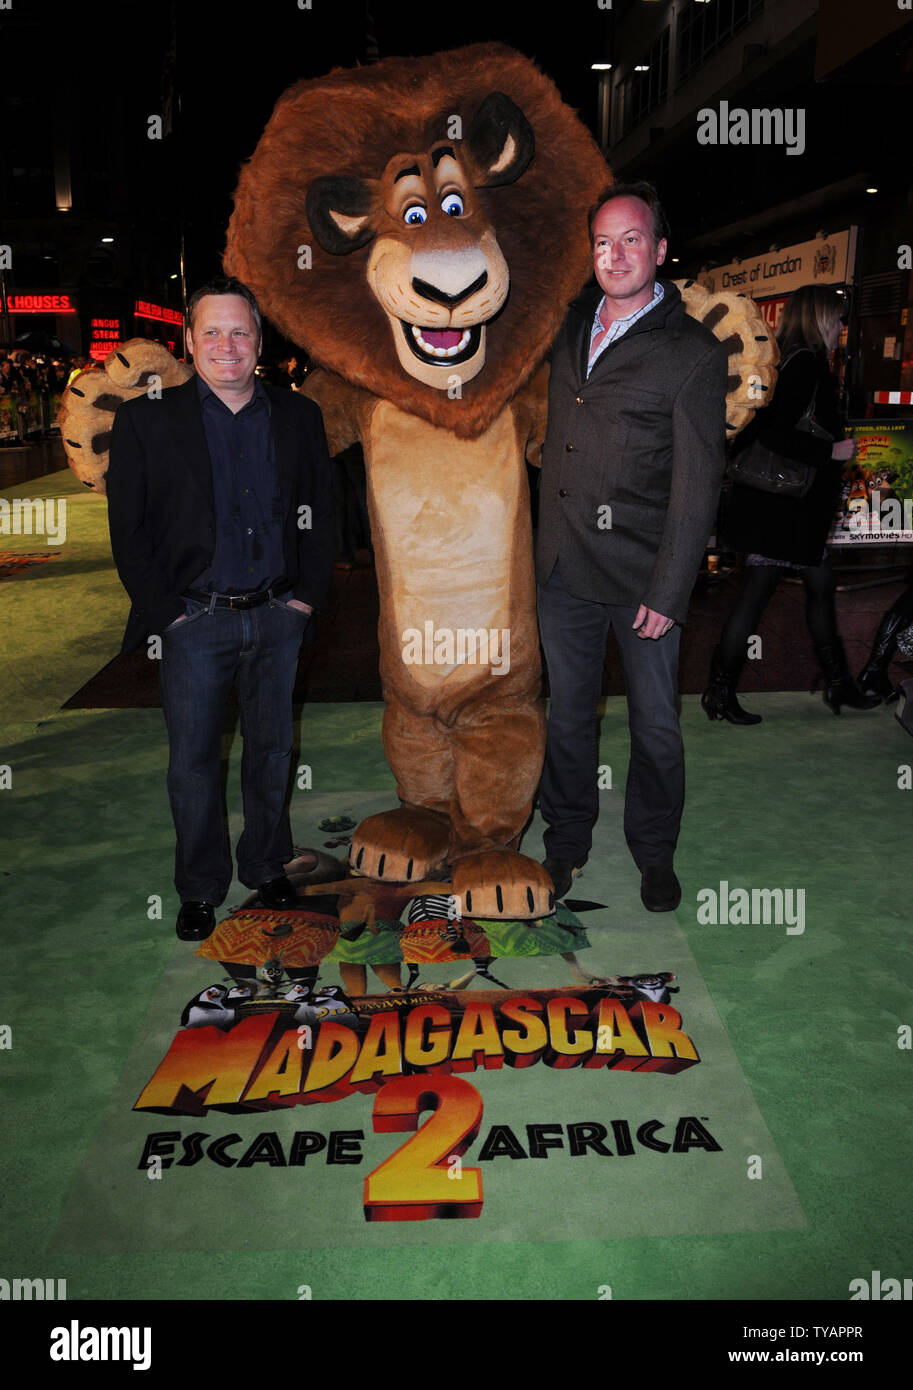 American directors Eric Darnell and Tom McGrath attend the premiere of 'Madagascar - Escape 2 Africa' at Empire, Leicester Square in London on November 23, 2008.  (UPI Photo/Rune Hellestad) Stock Photo